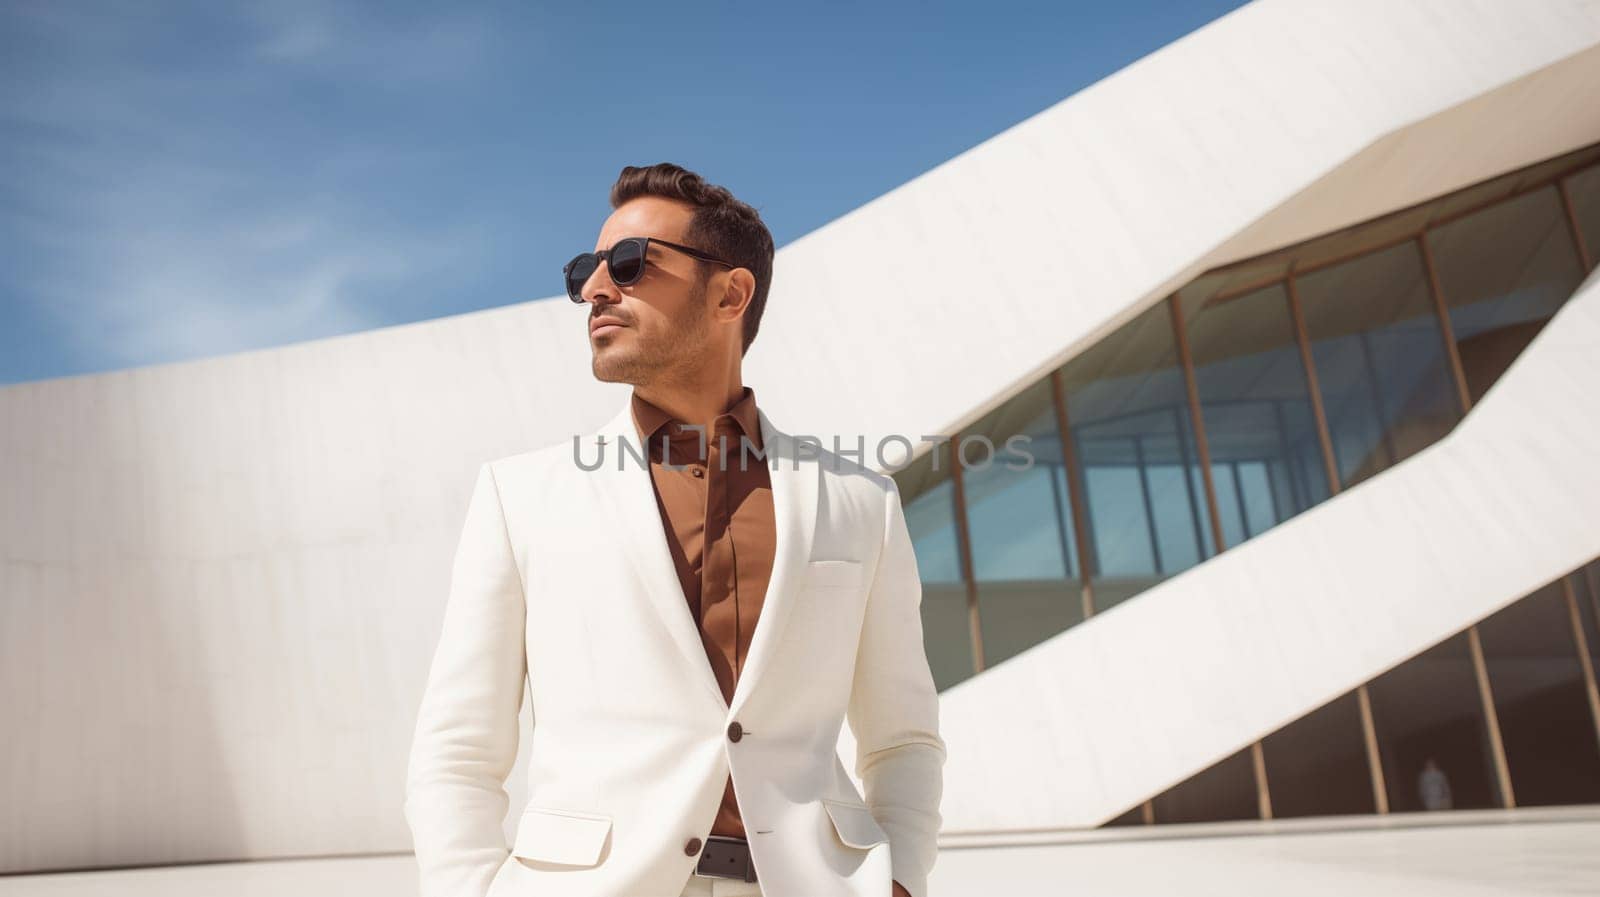 Fashion concept of successful stylish elegant man in white business suit looking away against the minimalism design architecture of a modern art museum building